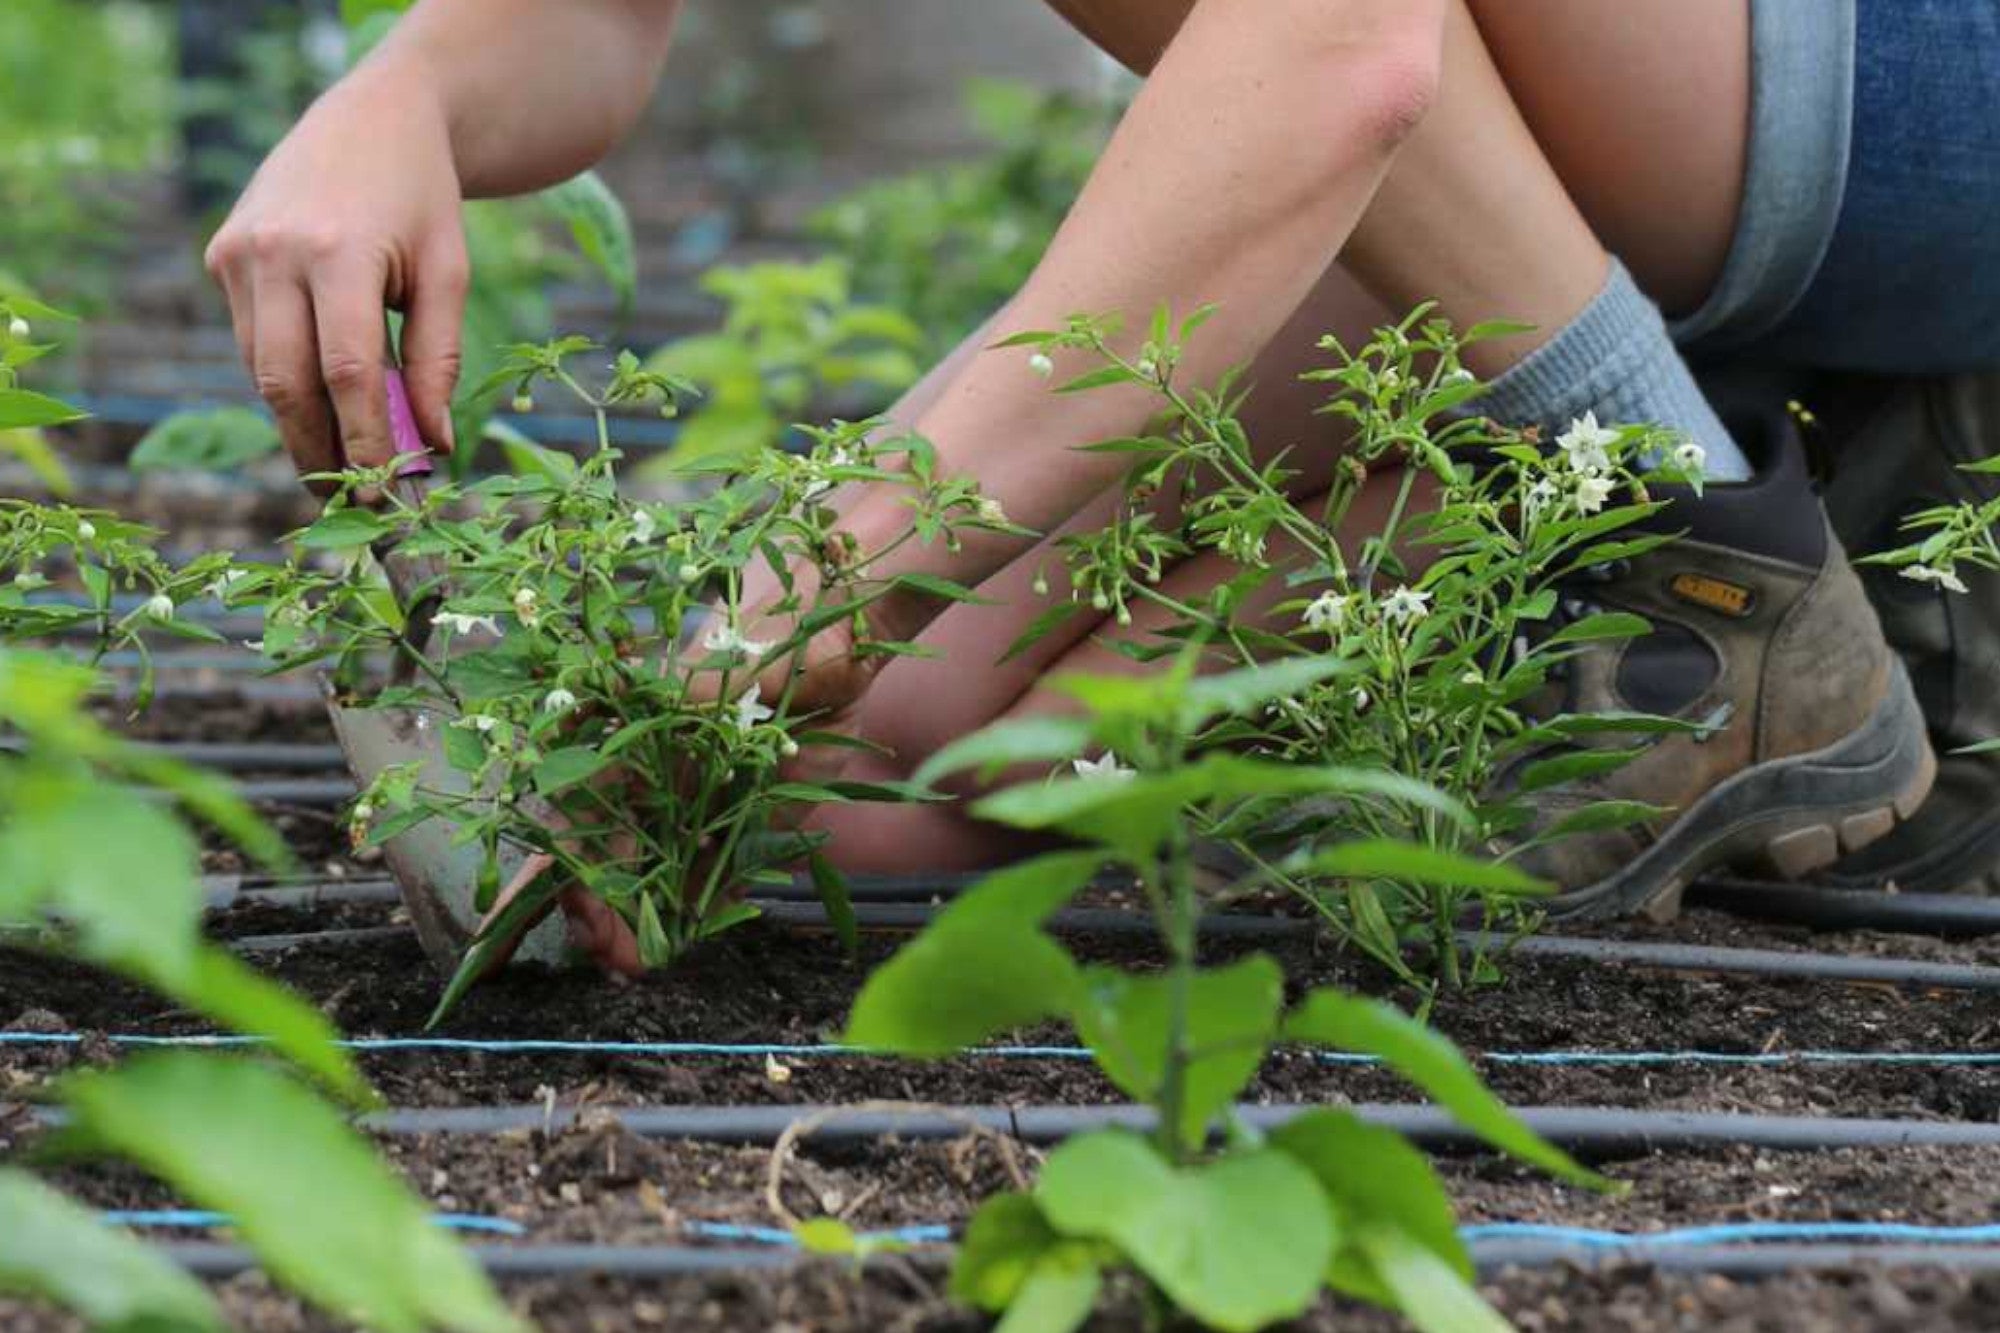 Sustainable living: What are the benefits of growing your own food?